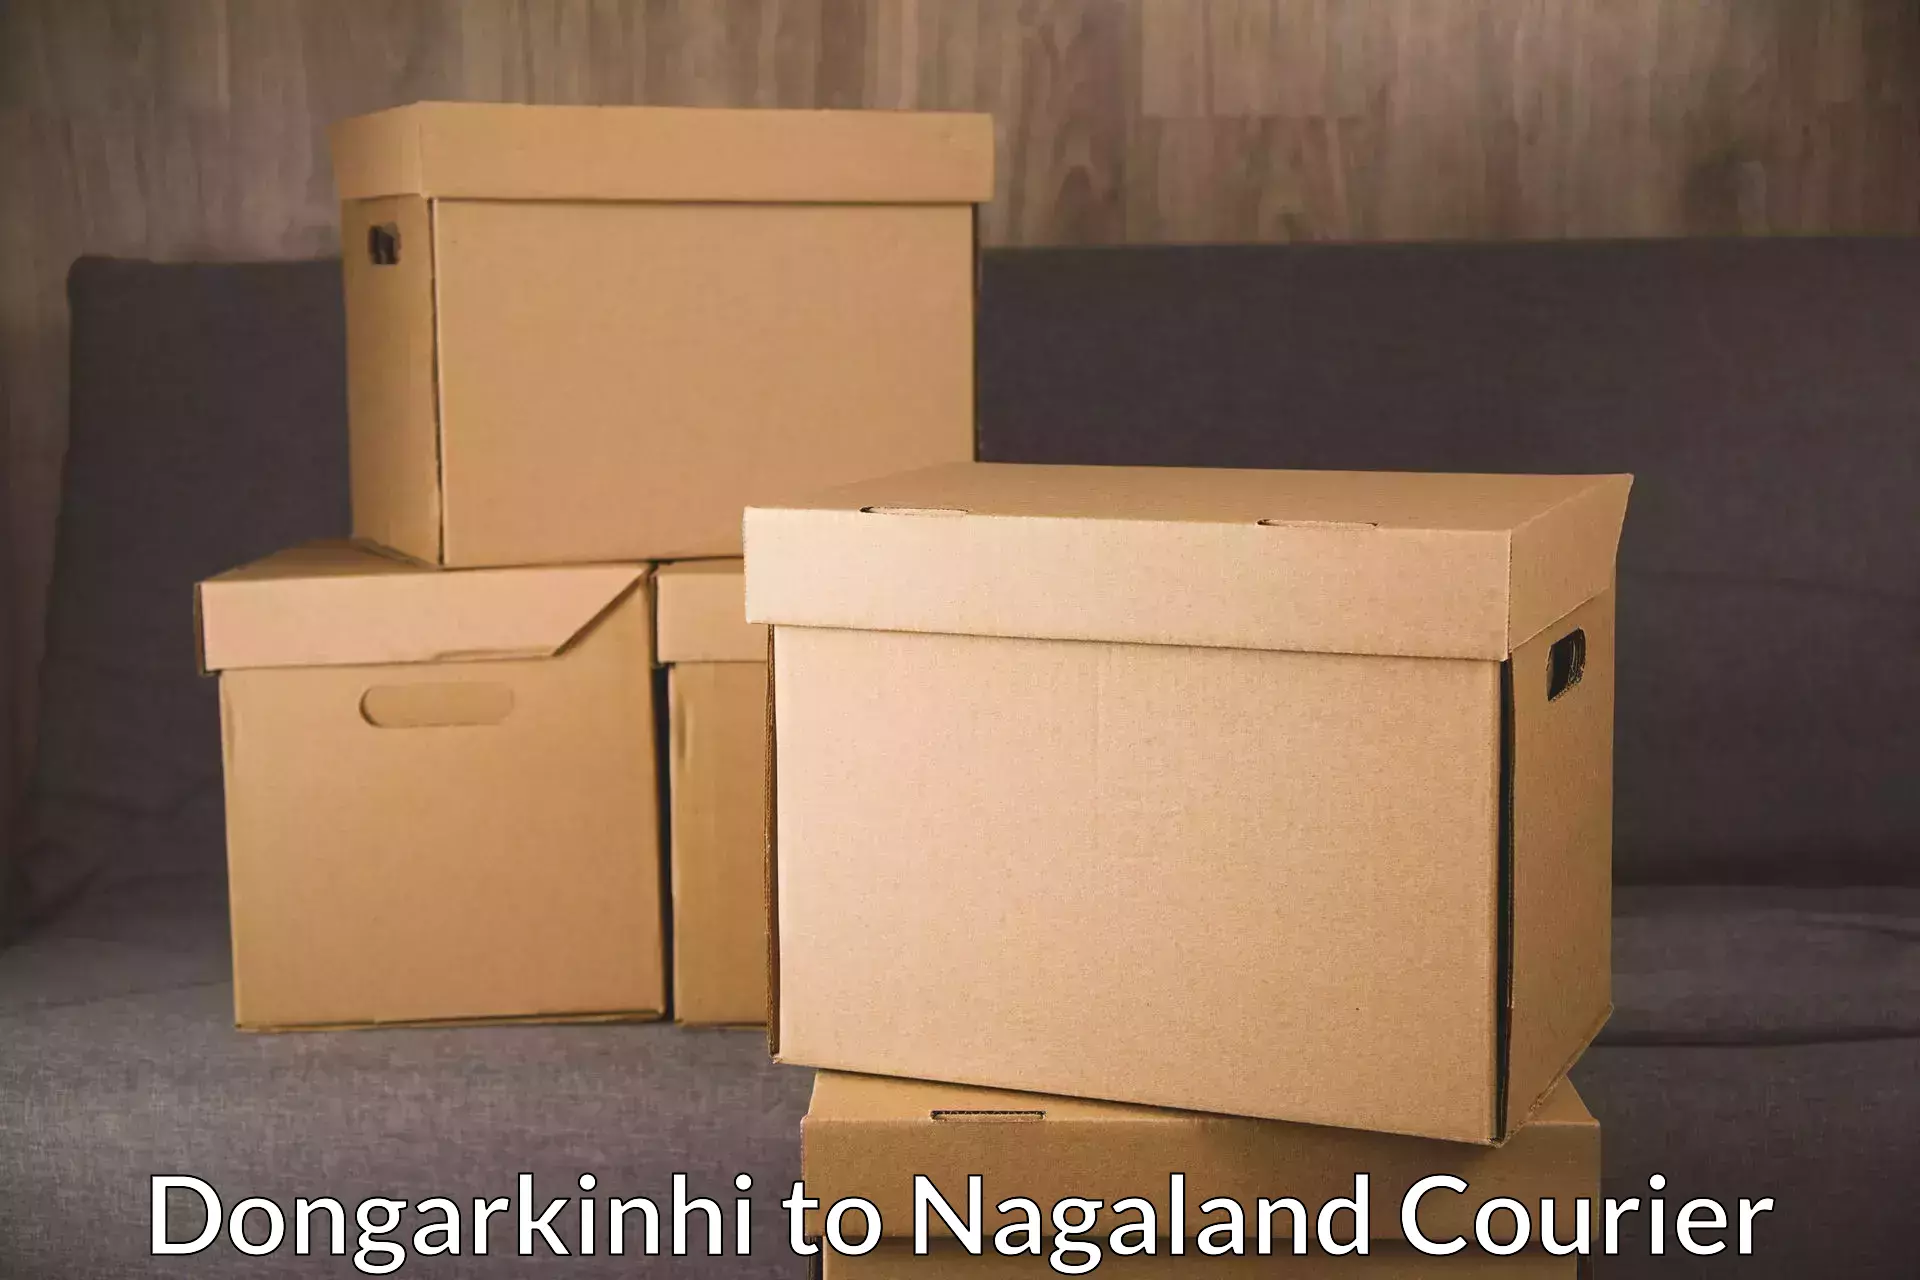 Reliable package handling Dongarkinhi to Nagaland